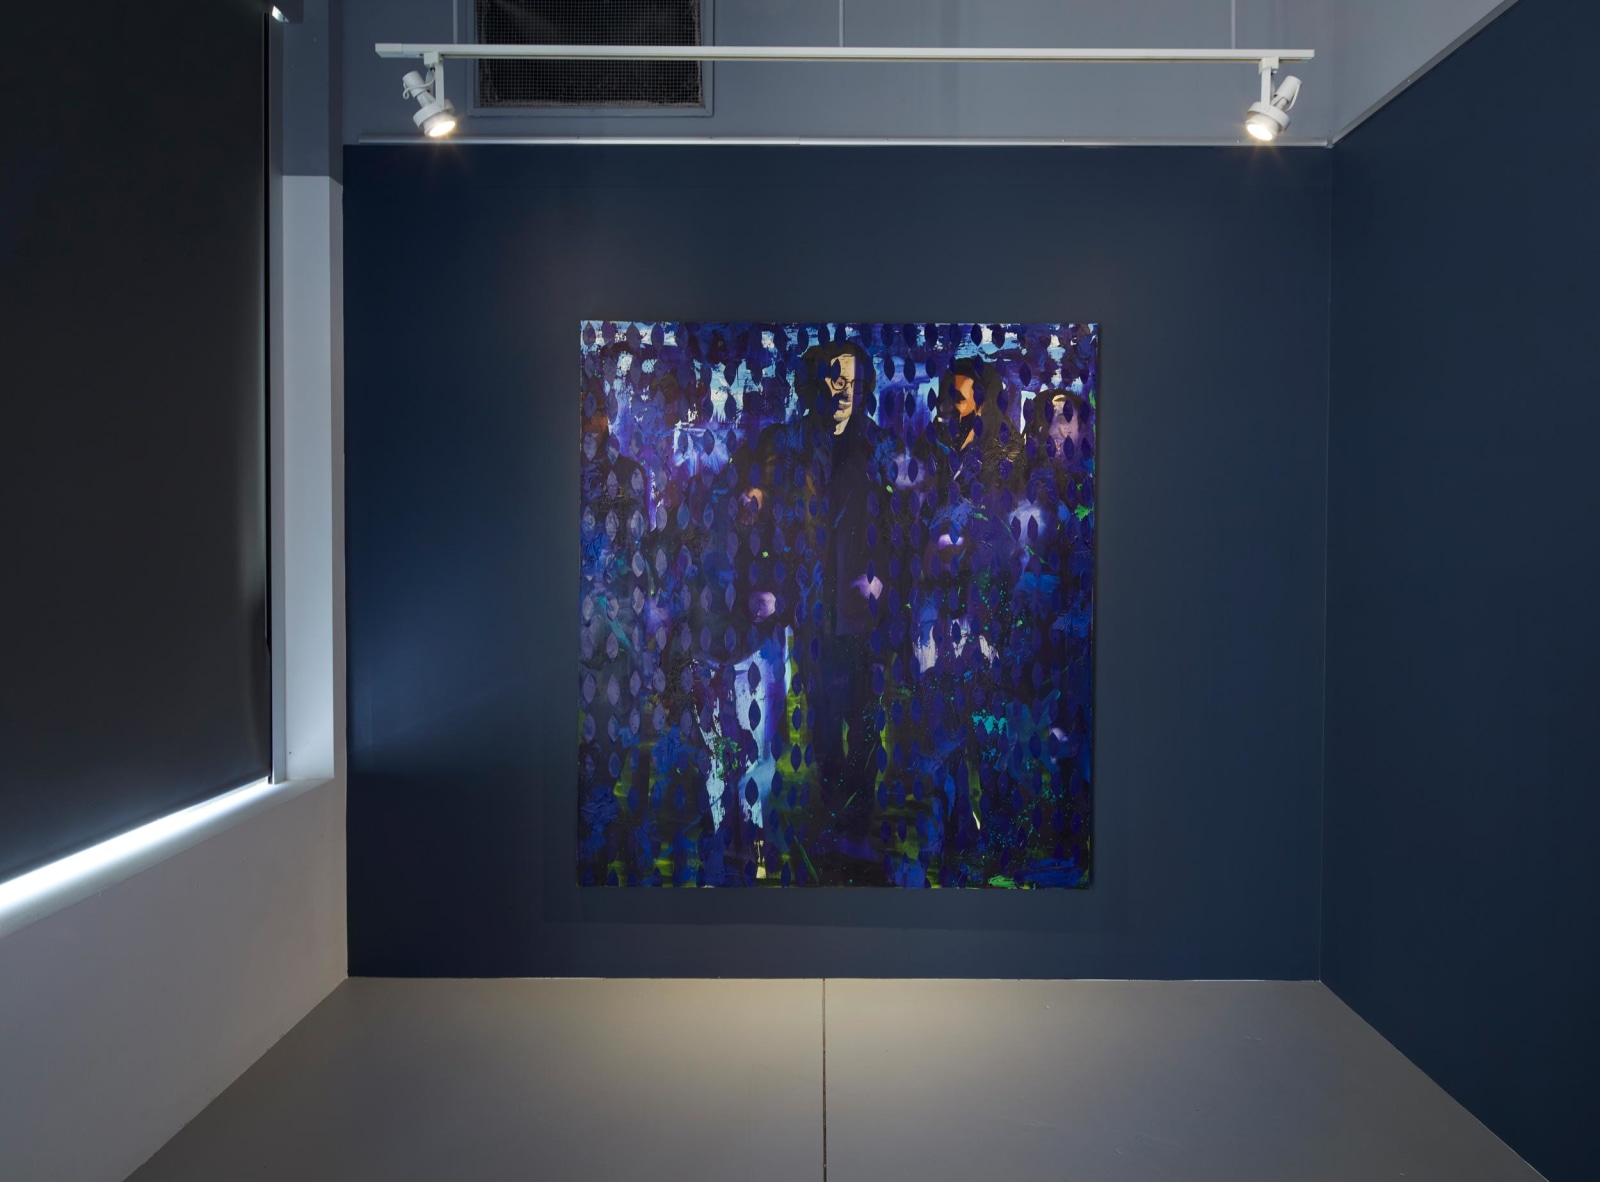 Dominic Chambers: What Makes the Earth Shake, Installation view